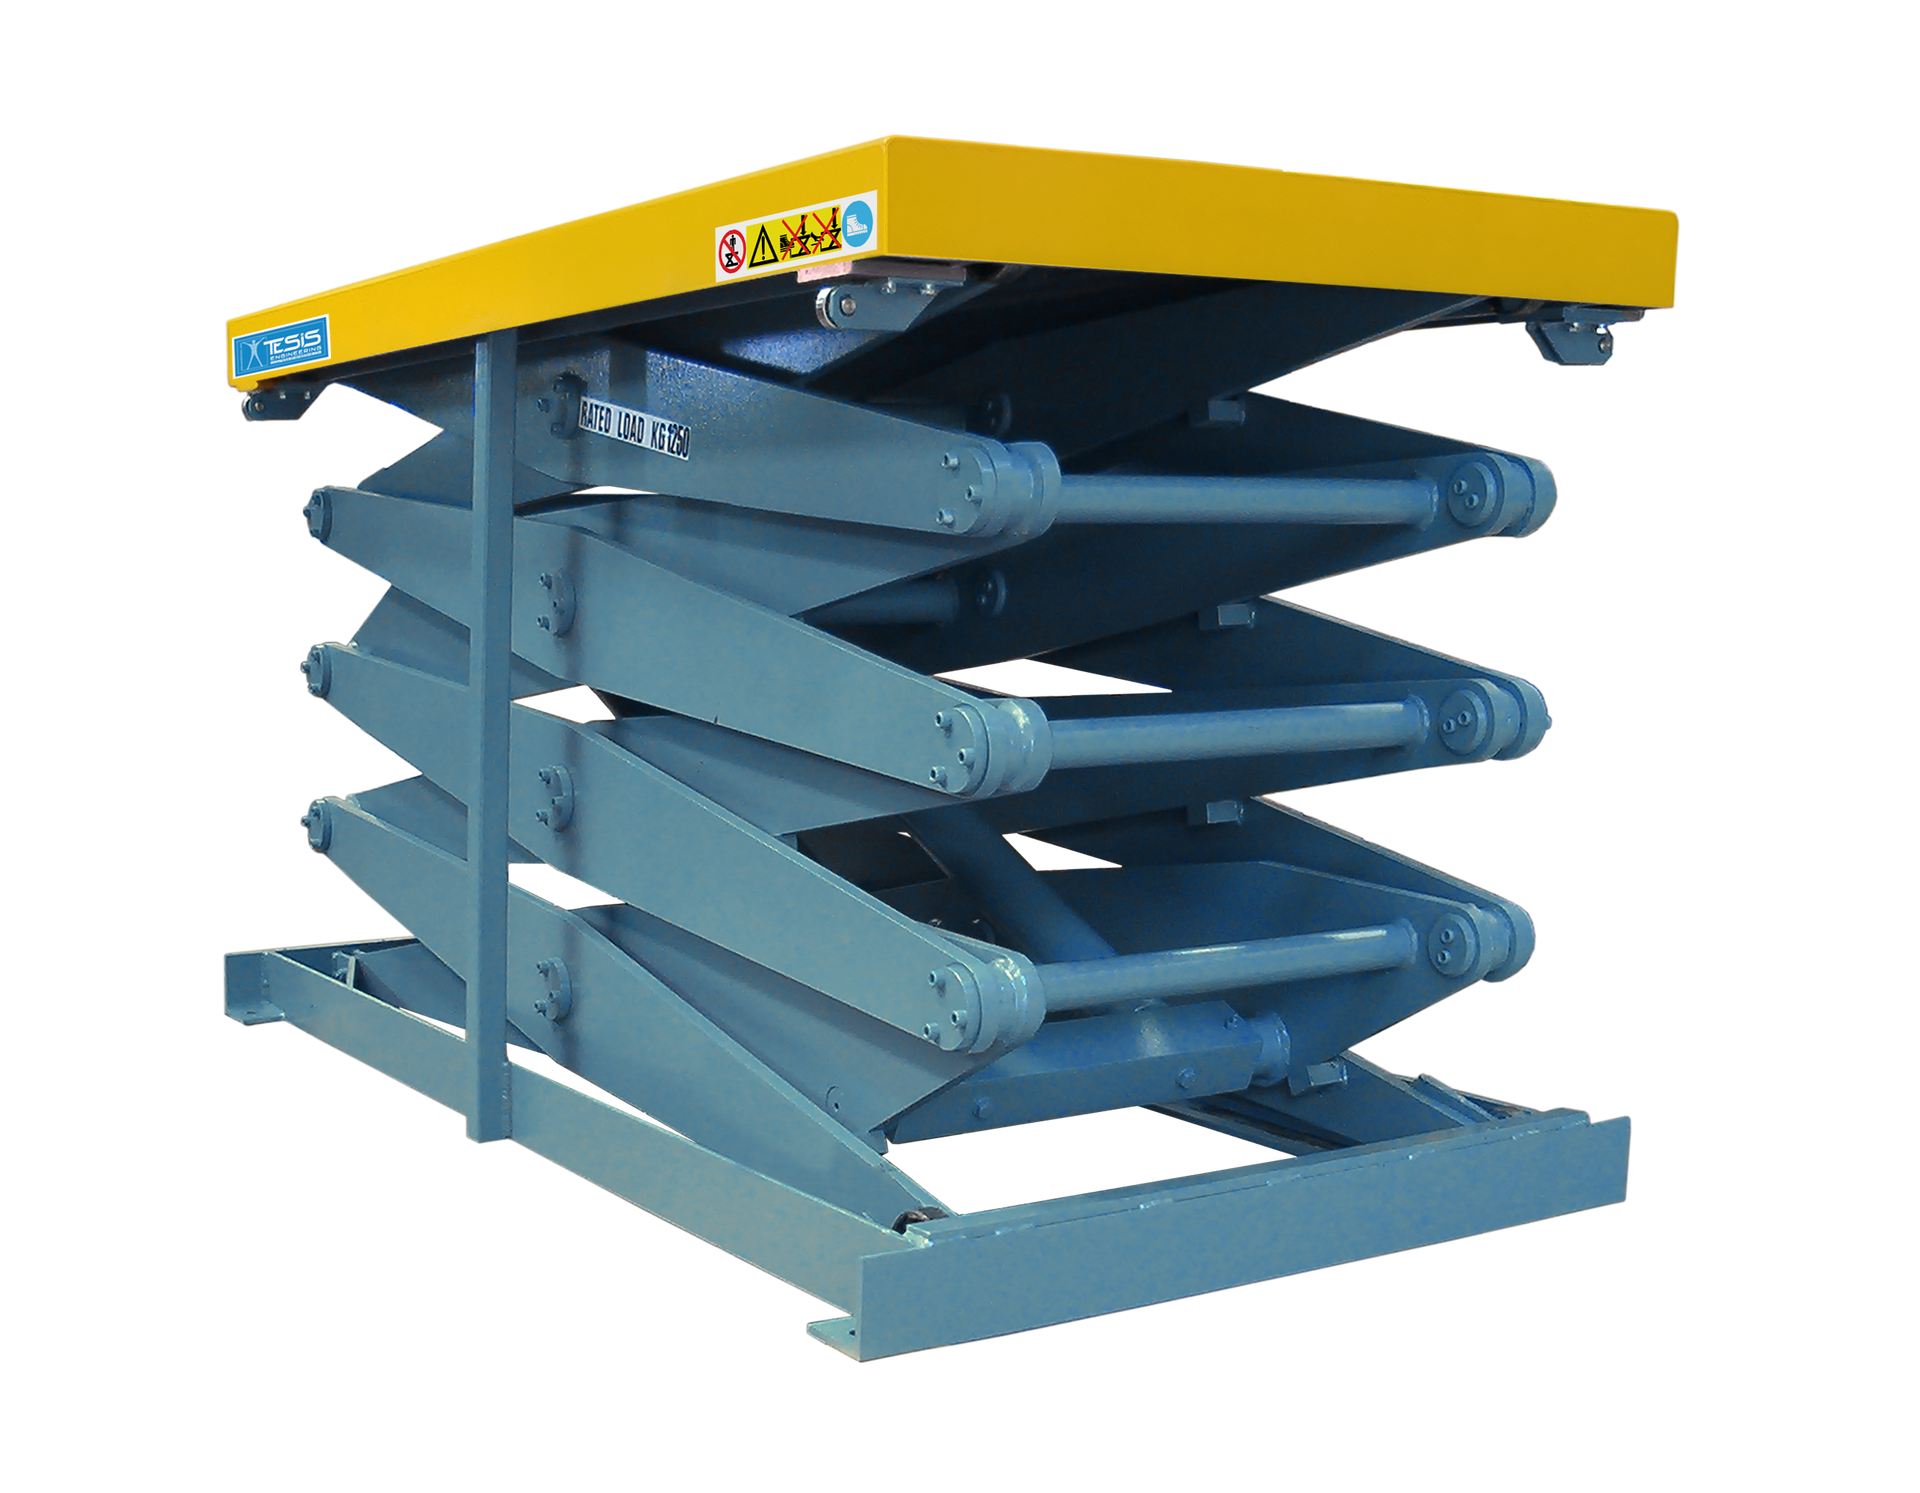 High rise lift tables, hydraulic lift tables with extended vertical travel, multiple scissor lift tables, multiple pantograph lifts